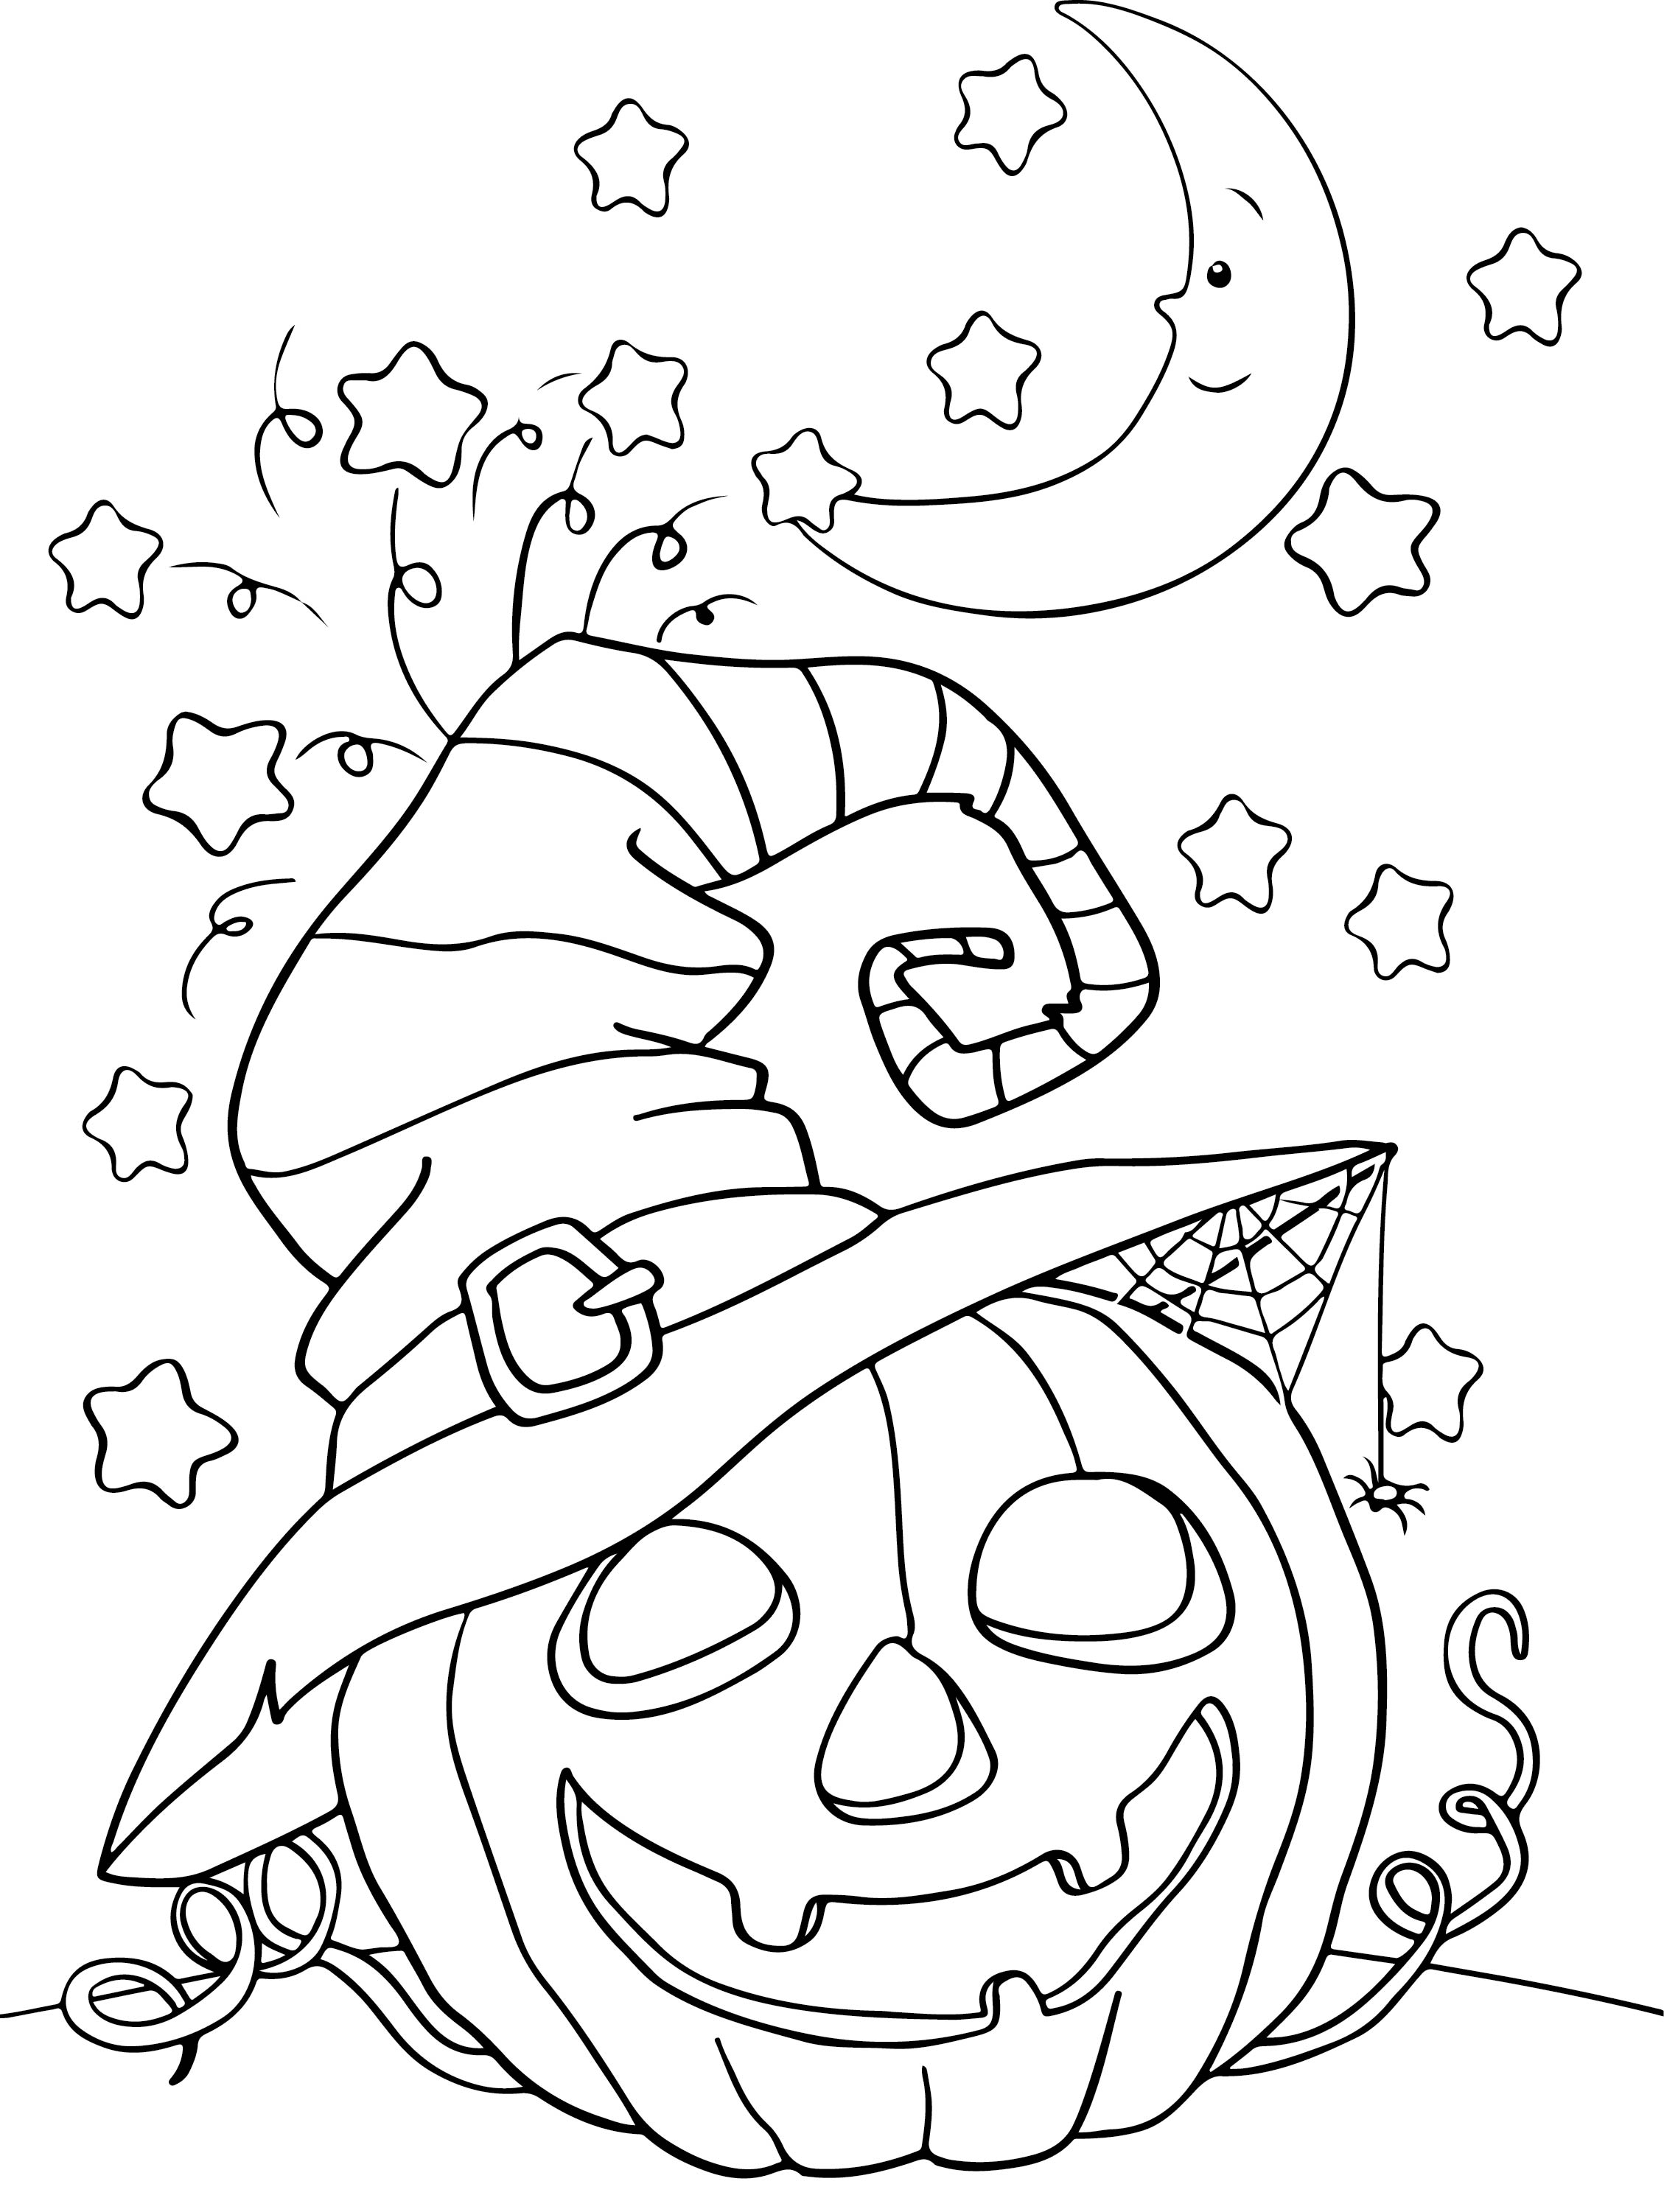  Halloween Coloring Pages For Teachers Free Download Gambr co